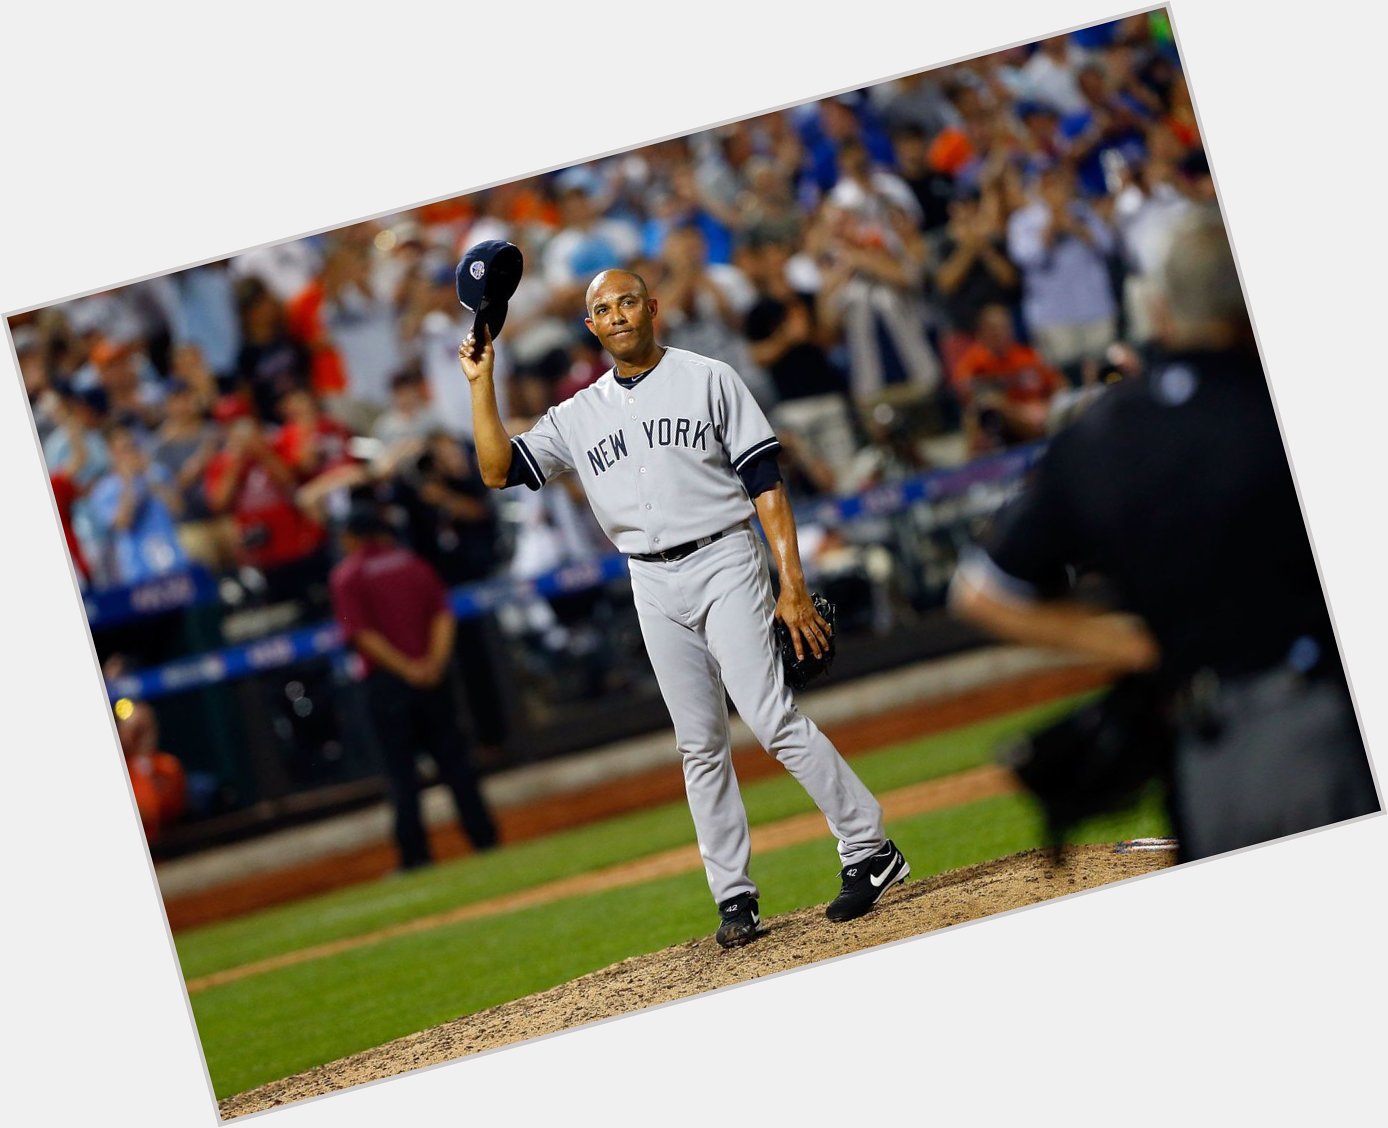 Happy birthday to the best closer of all-time, Mariano Rivera! 